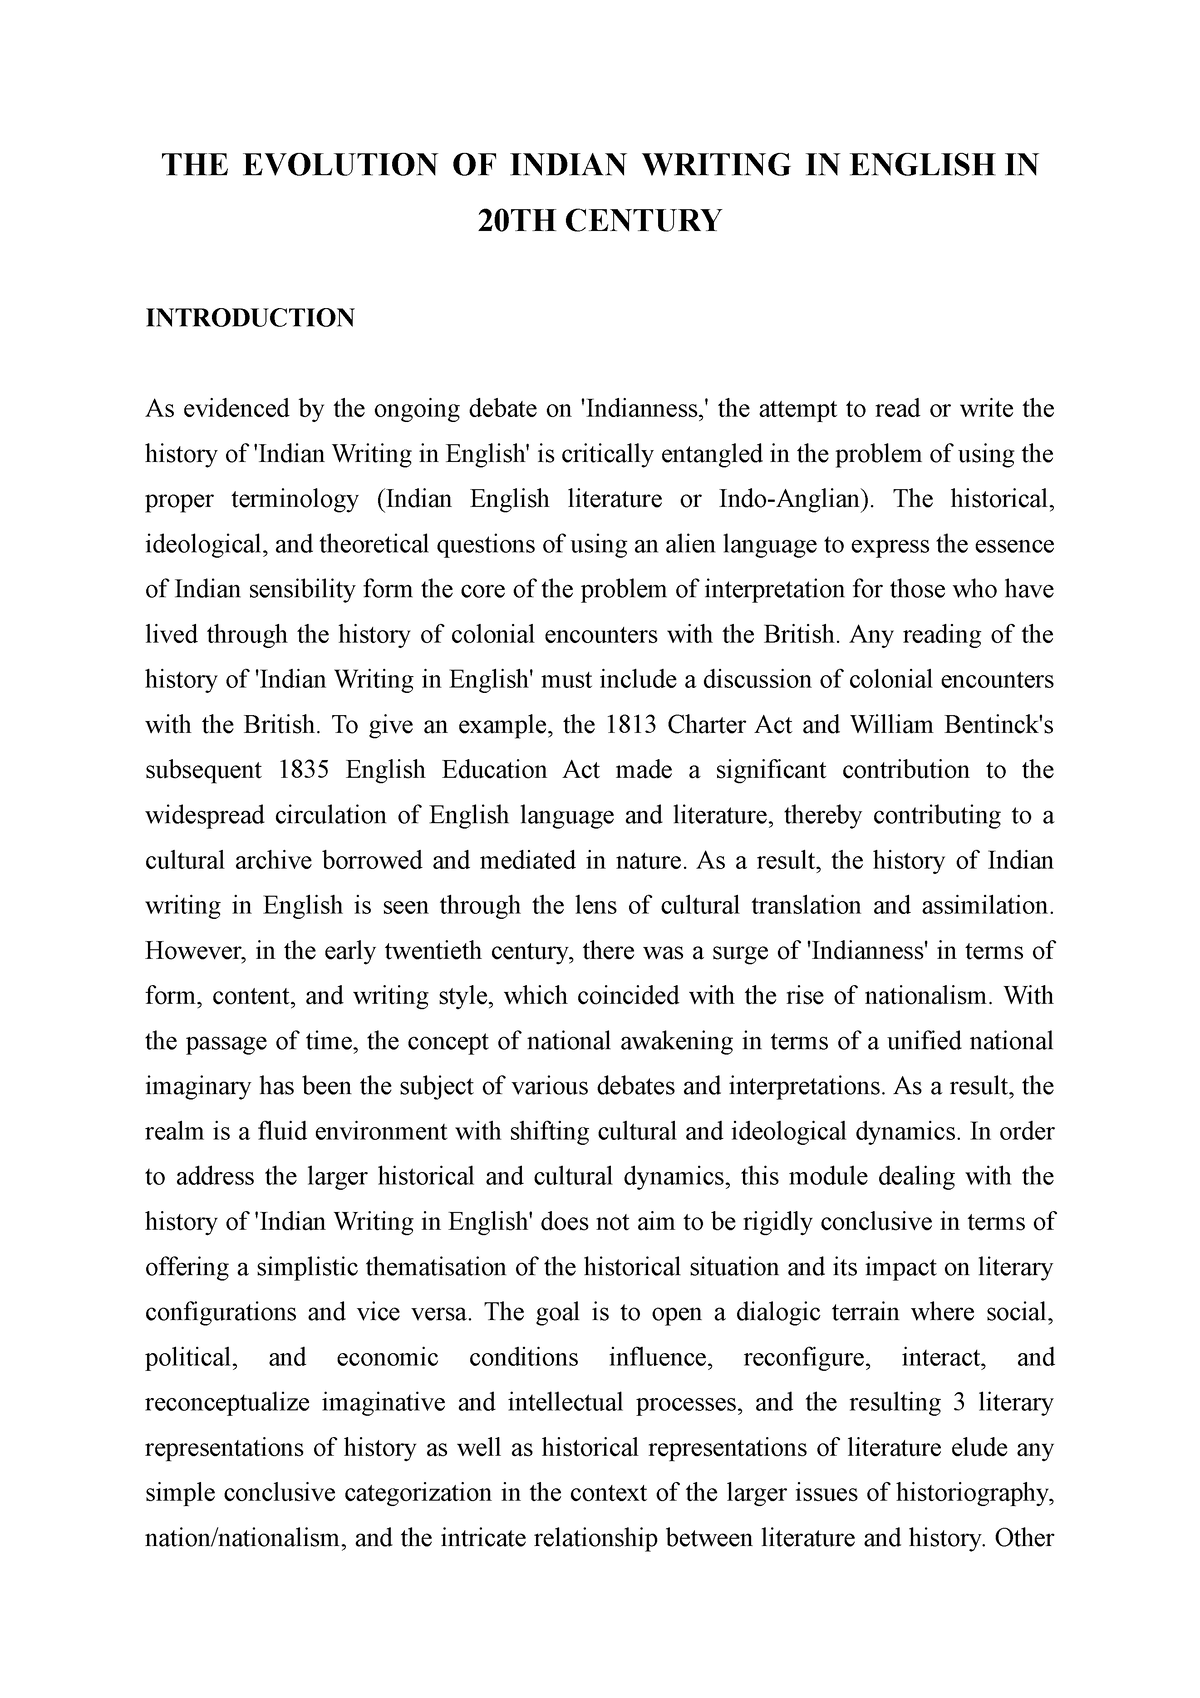 write an essay on the development of indian english fiction